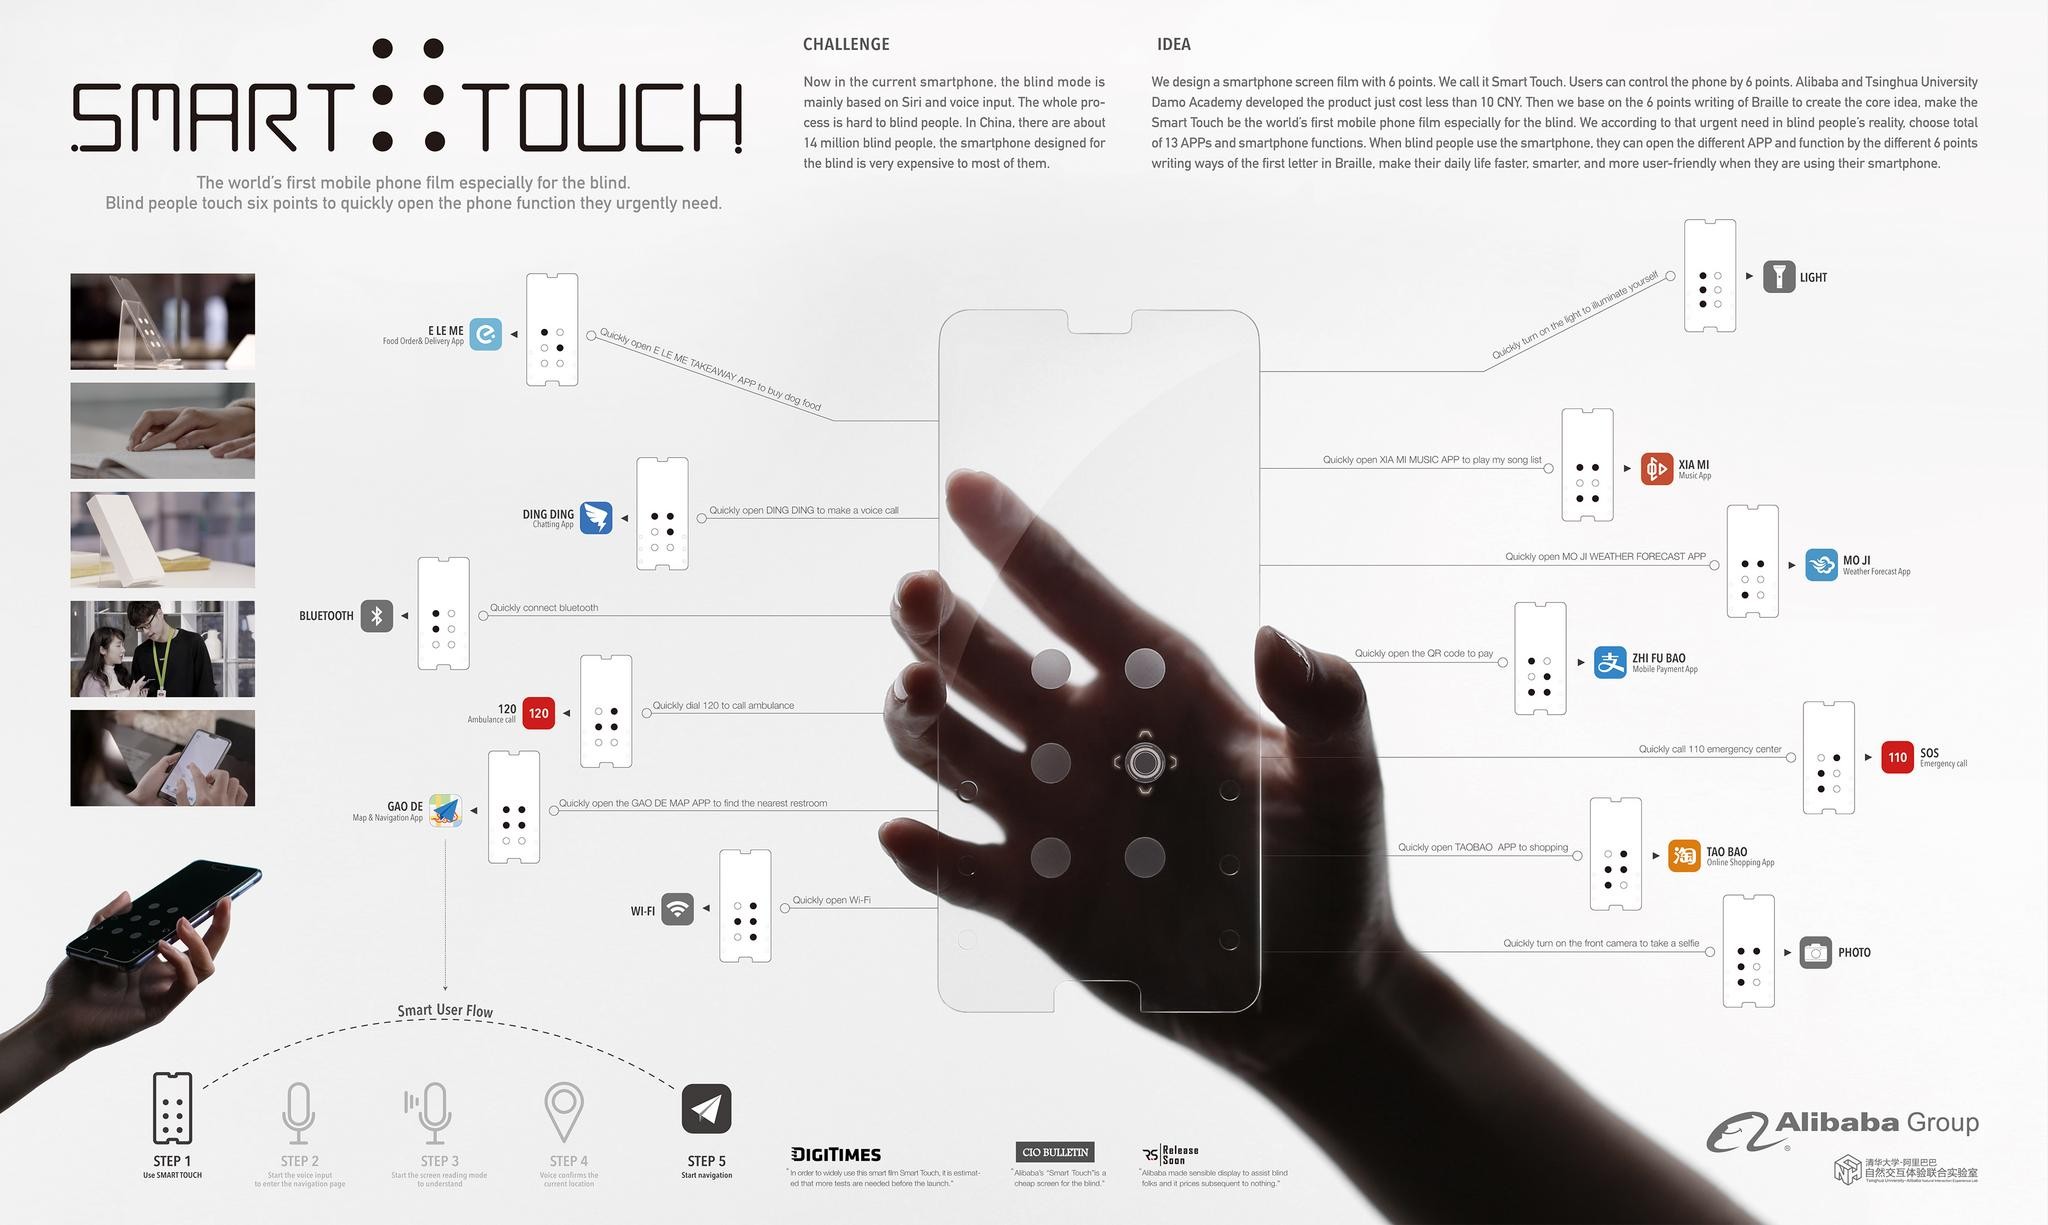 Smart Touch